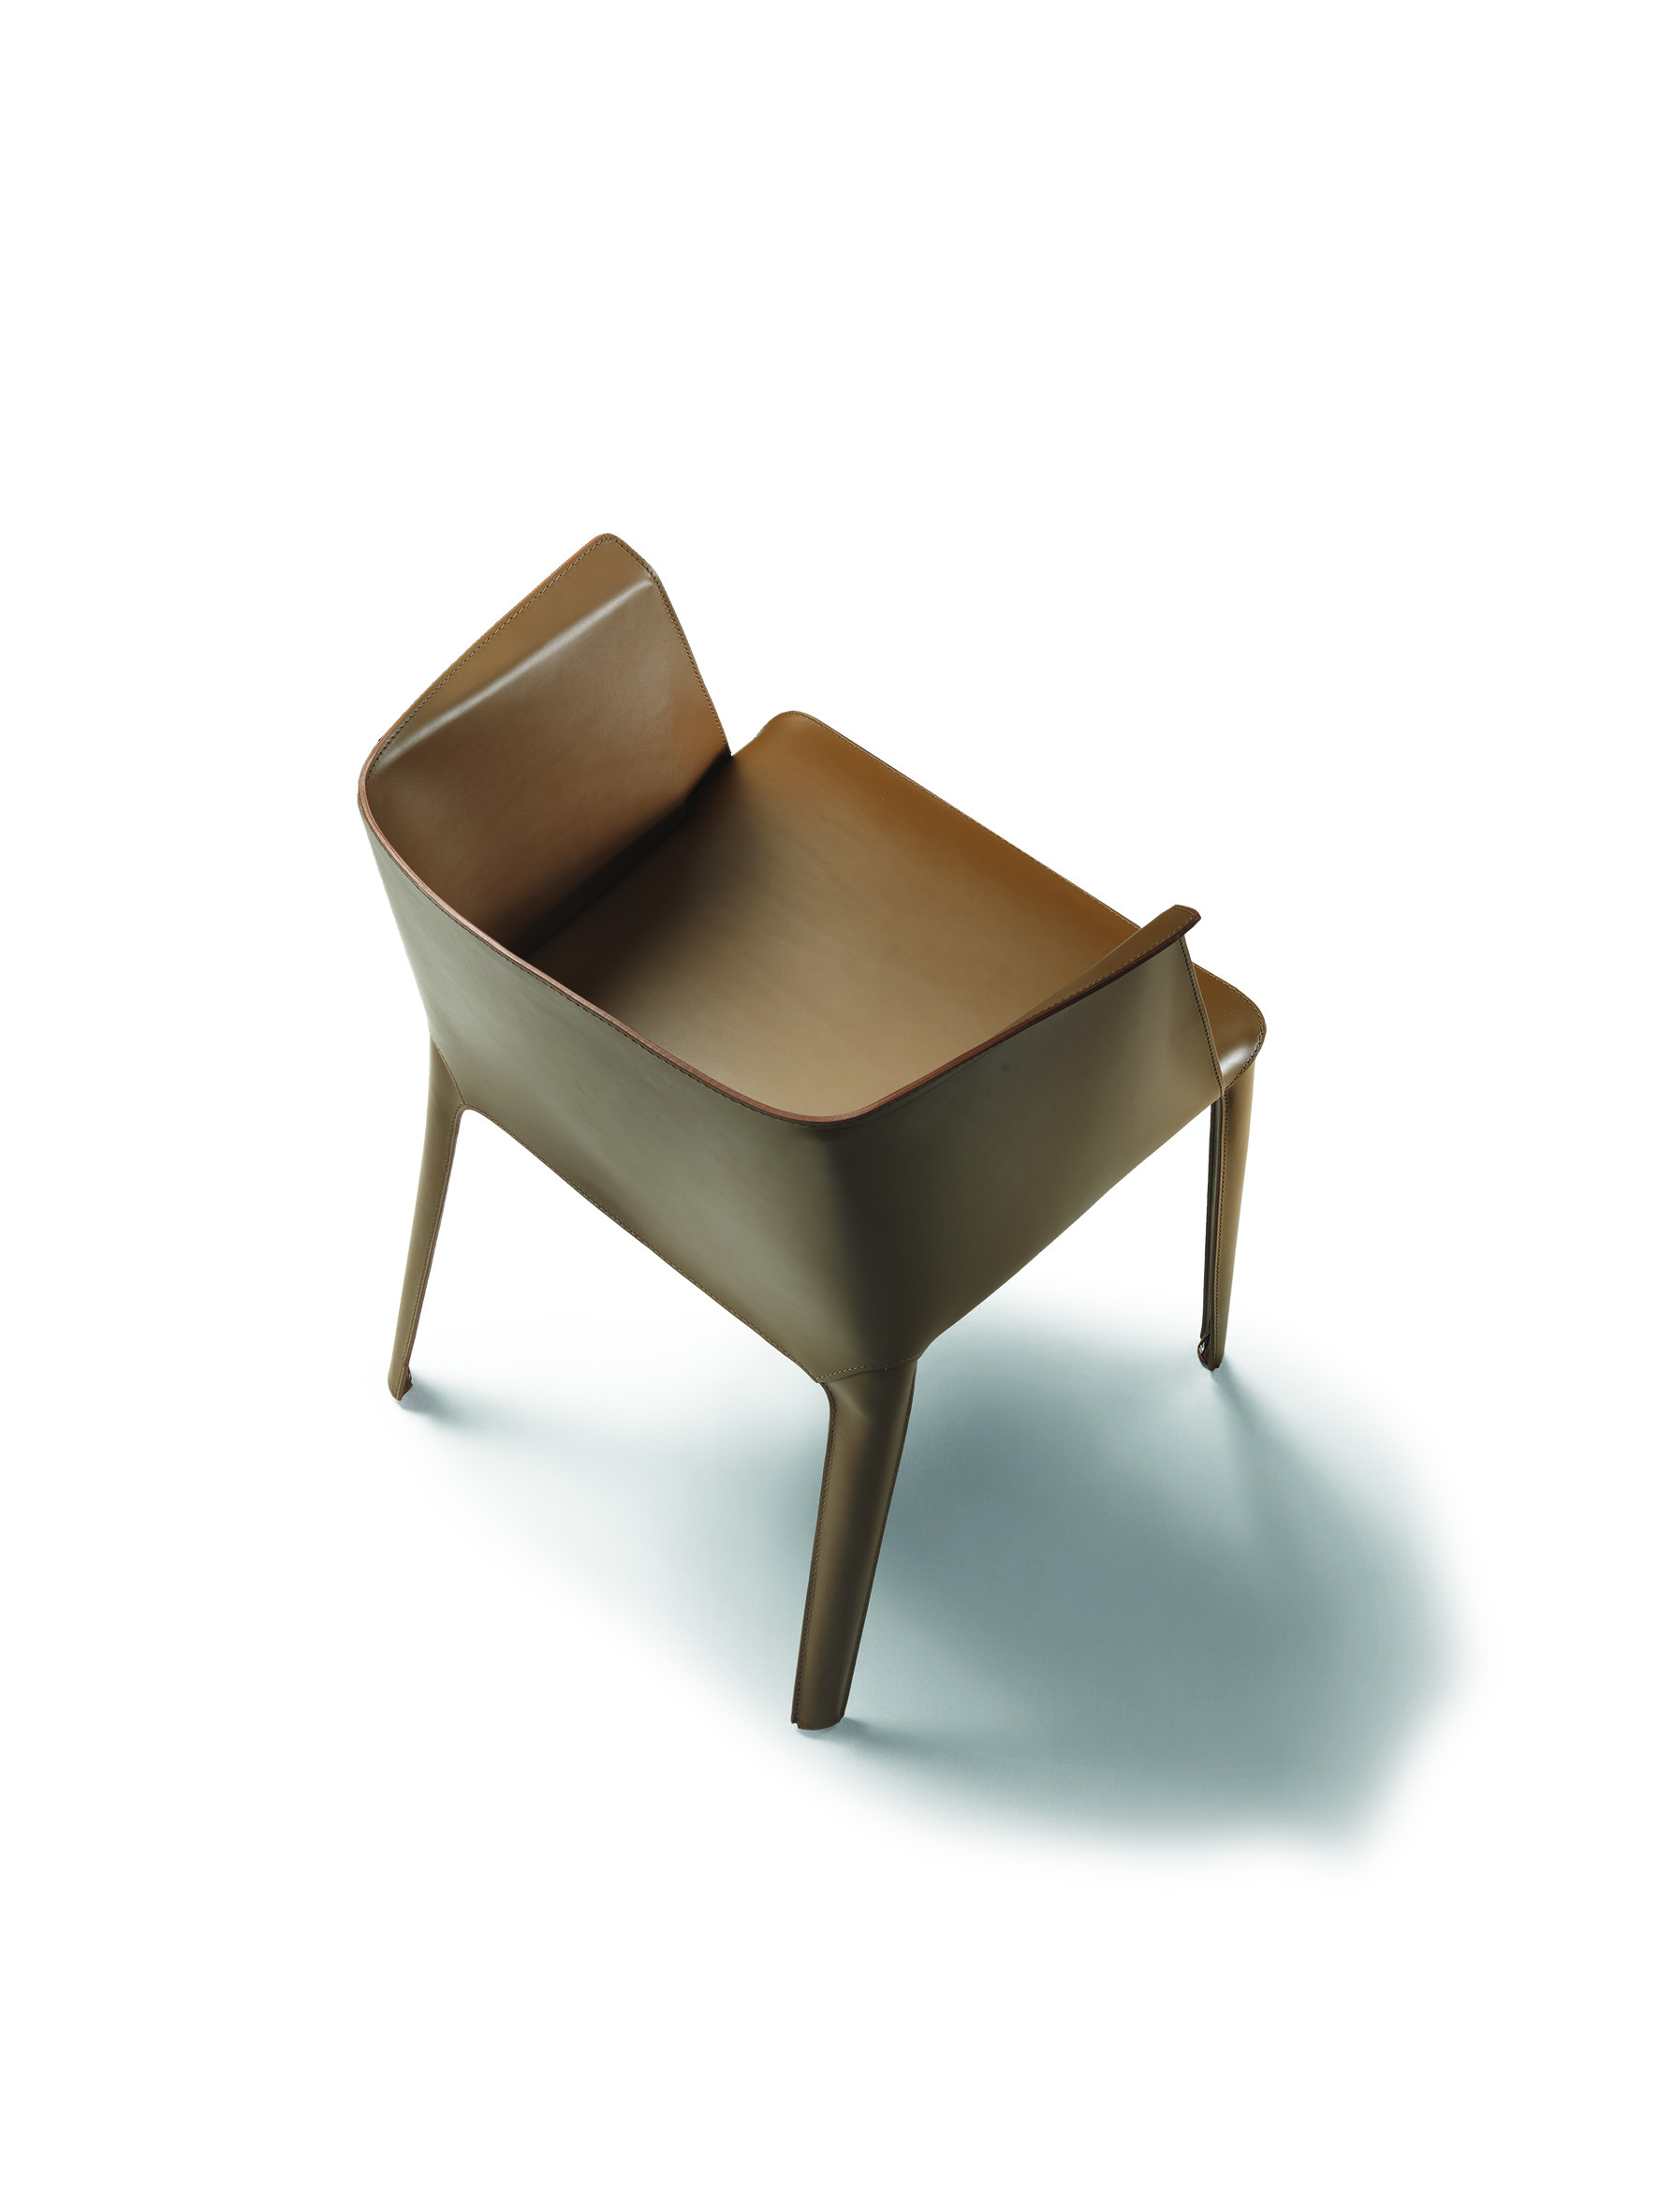 ISABEL – CHAIR